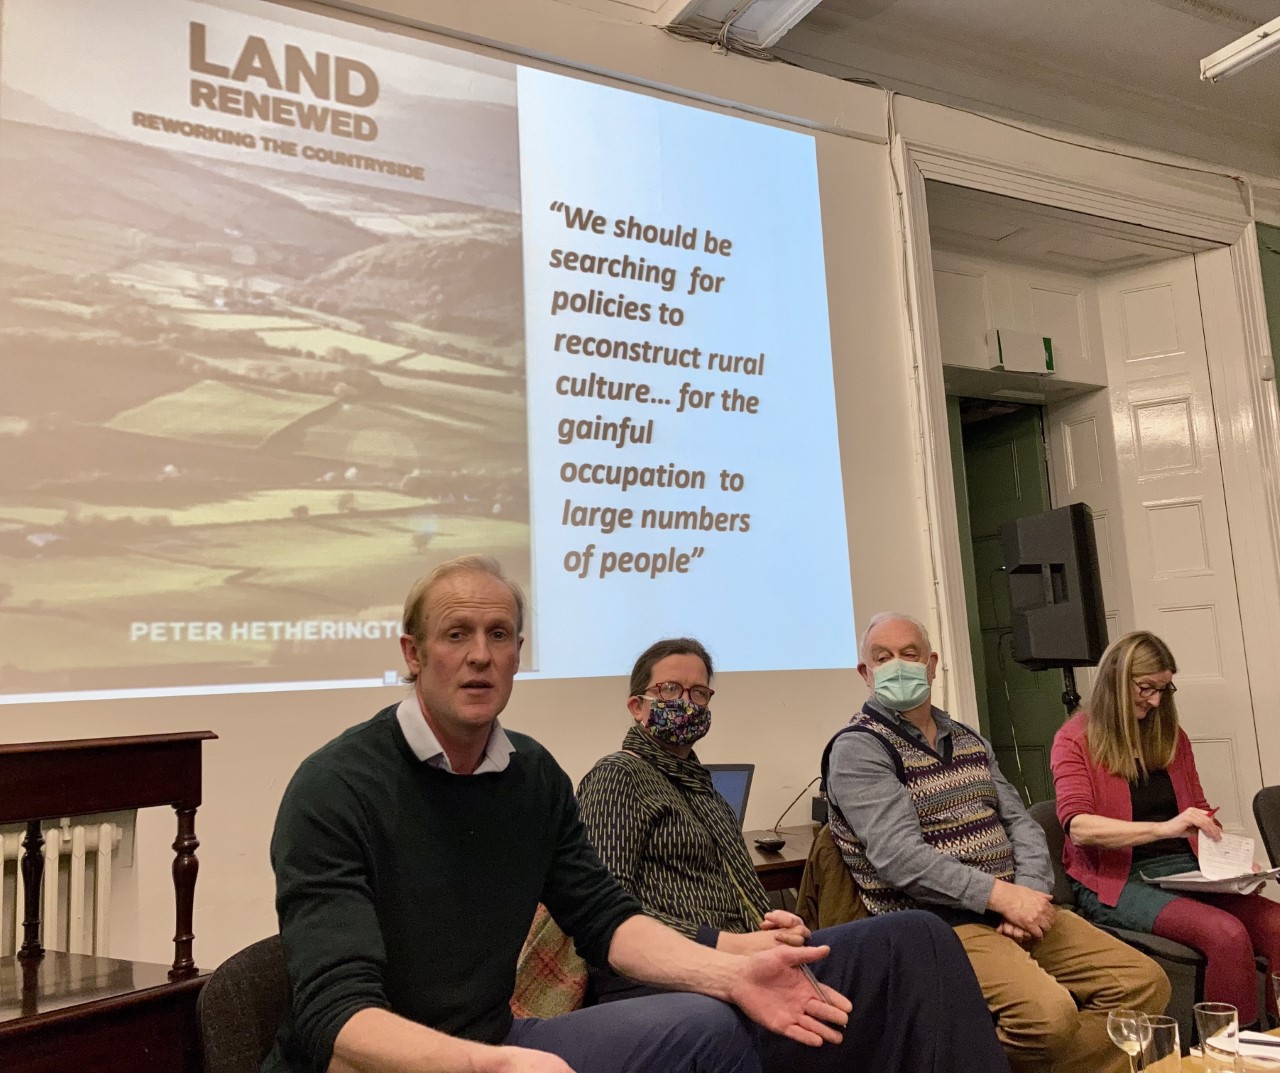 Book launch for 'Land Renewed' by Peter Hetherington